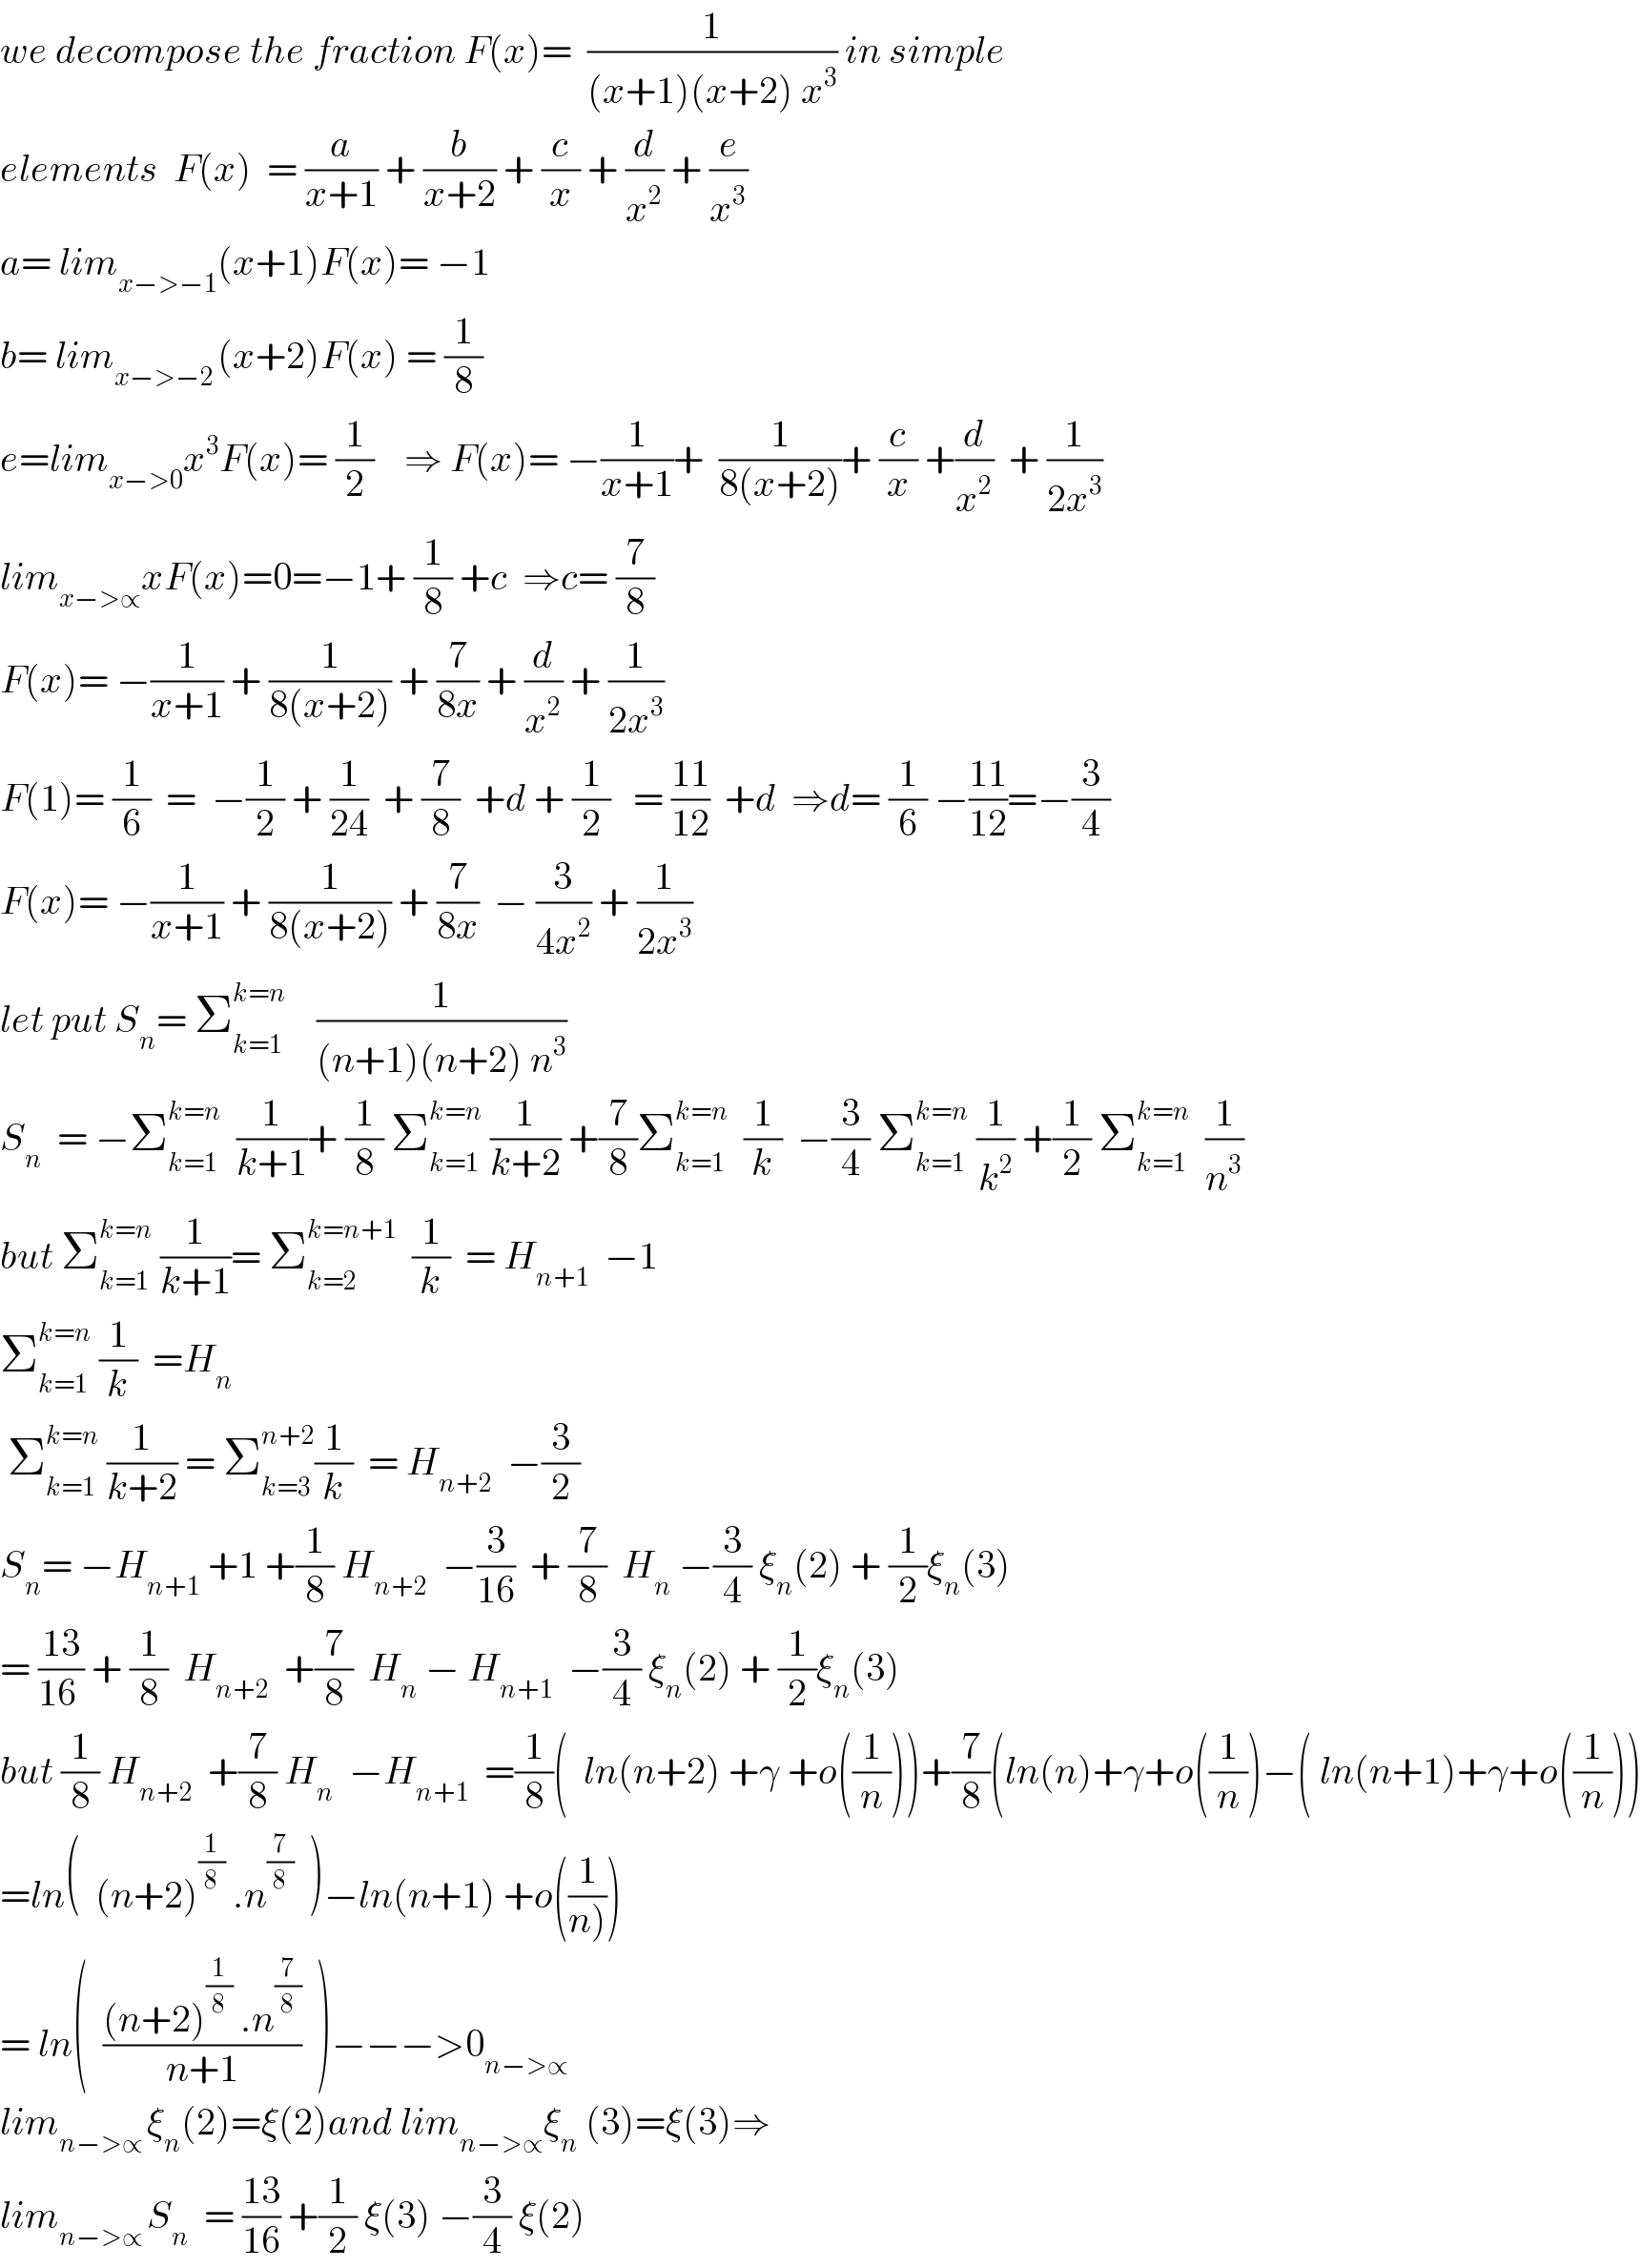 we decompose the fraction F(x)=  (1/((x+1)(x+2) x^3 )) in simple  elements  F(x)  = (a/(x+1)) + (b/(x+2)) + (c/x) + (d/x^2 ) + (e/x^3 )  a= lim_(x−>−1) (x+1)F(x)= −1  b= lim_(x−>−2 ) (x+2)F(x) = (1/8)  e=lim_(x−>0) x^3 F(x)= (1/2)    ⇒ F(x)= −(1/(x+1))+  (1/(8(x+2)))+ (c/x) +(d/x^2 )  + (1/(2x^3 ))  lim_(x−>∝) xF(x)=0=−1+ (1/8) +c  ⇒c= (7/8)  F(x)= −(1/(x+1)) + (1/(8(x+2))) + (7/(8x)) + (d/x^2 ) + (1/(2x^3 ))  F(1)= (1/6)  =  −(1/2) + (1/(24))  + (7/8)  +d + (1/2)   = ((11)/(12))  +d  ⇒d= (1/6) −((11)/(12))=−(3/4)  F(x)= −(1/(x+1)) + (1/(8(x+2))) + (7/(8x))  − (3/(4x^2 )) + (1/(2x^3 ))  let put S_n = Σ_(k=1) ^(k=n)     (1/((n+1)(n+2) n^3 ))  S_n   = −Σ_(k=1) ^(k=n)   (1/(k+1))+ (1/8) Σ_(k=1) ^(k=n)  (1/(k+2)) +(7/8)Σ_(k=1) ^(k=n)   (1/k)  −(3/4) Σ_(k=1) ^(k=n)  (1/k^2 ) +(1/2) Σ_(k=1) ^(k=n)   (1/n^3 )  but Σ_(k=1) ^(k=n)  (1/(k+1))= Σ_(k=2) ^(k=n+1)   (1/k)  = H_(n+1)   −1  Σ_(k=1) ^(k=n)  (1/k)  =H_n    Σ_(k=1) ^(k=n)  (1/(k+2)) = Σ_(k=3) ^(n+2) (1/k)  = H_(n+2)   −(3/2)  S_n = −H_(n+1)  +1 +(1/8) H_(n+2)   −(3/(16))  + (7/8)  H_n  −(3/4) ξ_n (2) + (1/2)ξ_n (3)  = ((13)/(16 )) + (1/8)  H_(n+2)   +(7/8)  H_n  − H_(n+1)   −(3/4) ξ_n (2) + (1/2)ξ_n (3)  but (1/8) H_(n+2)   +(7/8) H_n   −H_(n+1)   =(1/8)(  ln(n+2) +γ +o((1/n)))+(7/8)(ln(n)+γ+o((1/n))−( ln(n+1)+γ+o((1/n)))  =ln(  (n+2)^(1/8)  .n^(7/8)   )−ln(n+1) +o((1/(n))))  = ln(  (((n+2)^(1/8)  .n^(7/8) )/(n+1))  )−−−>0_(n−>∝)   lim_(n−>∝ ) ξ_n (2)=ξ(2)and lim_(n−>∝) ξ_n  (3)=ξ(3)⇒  lim_(n−>∝ ) S_n   = ((13)/(16)) +(1/2) ξ(3) −(3/4) ξ(2)  